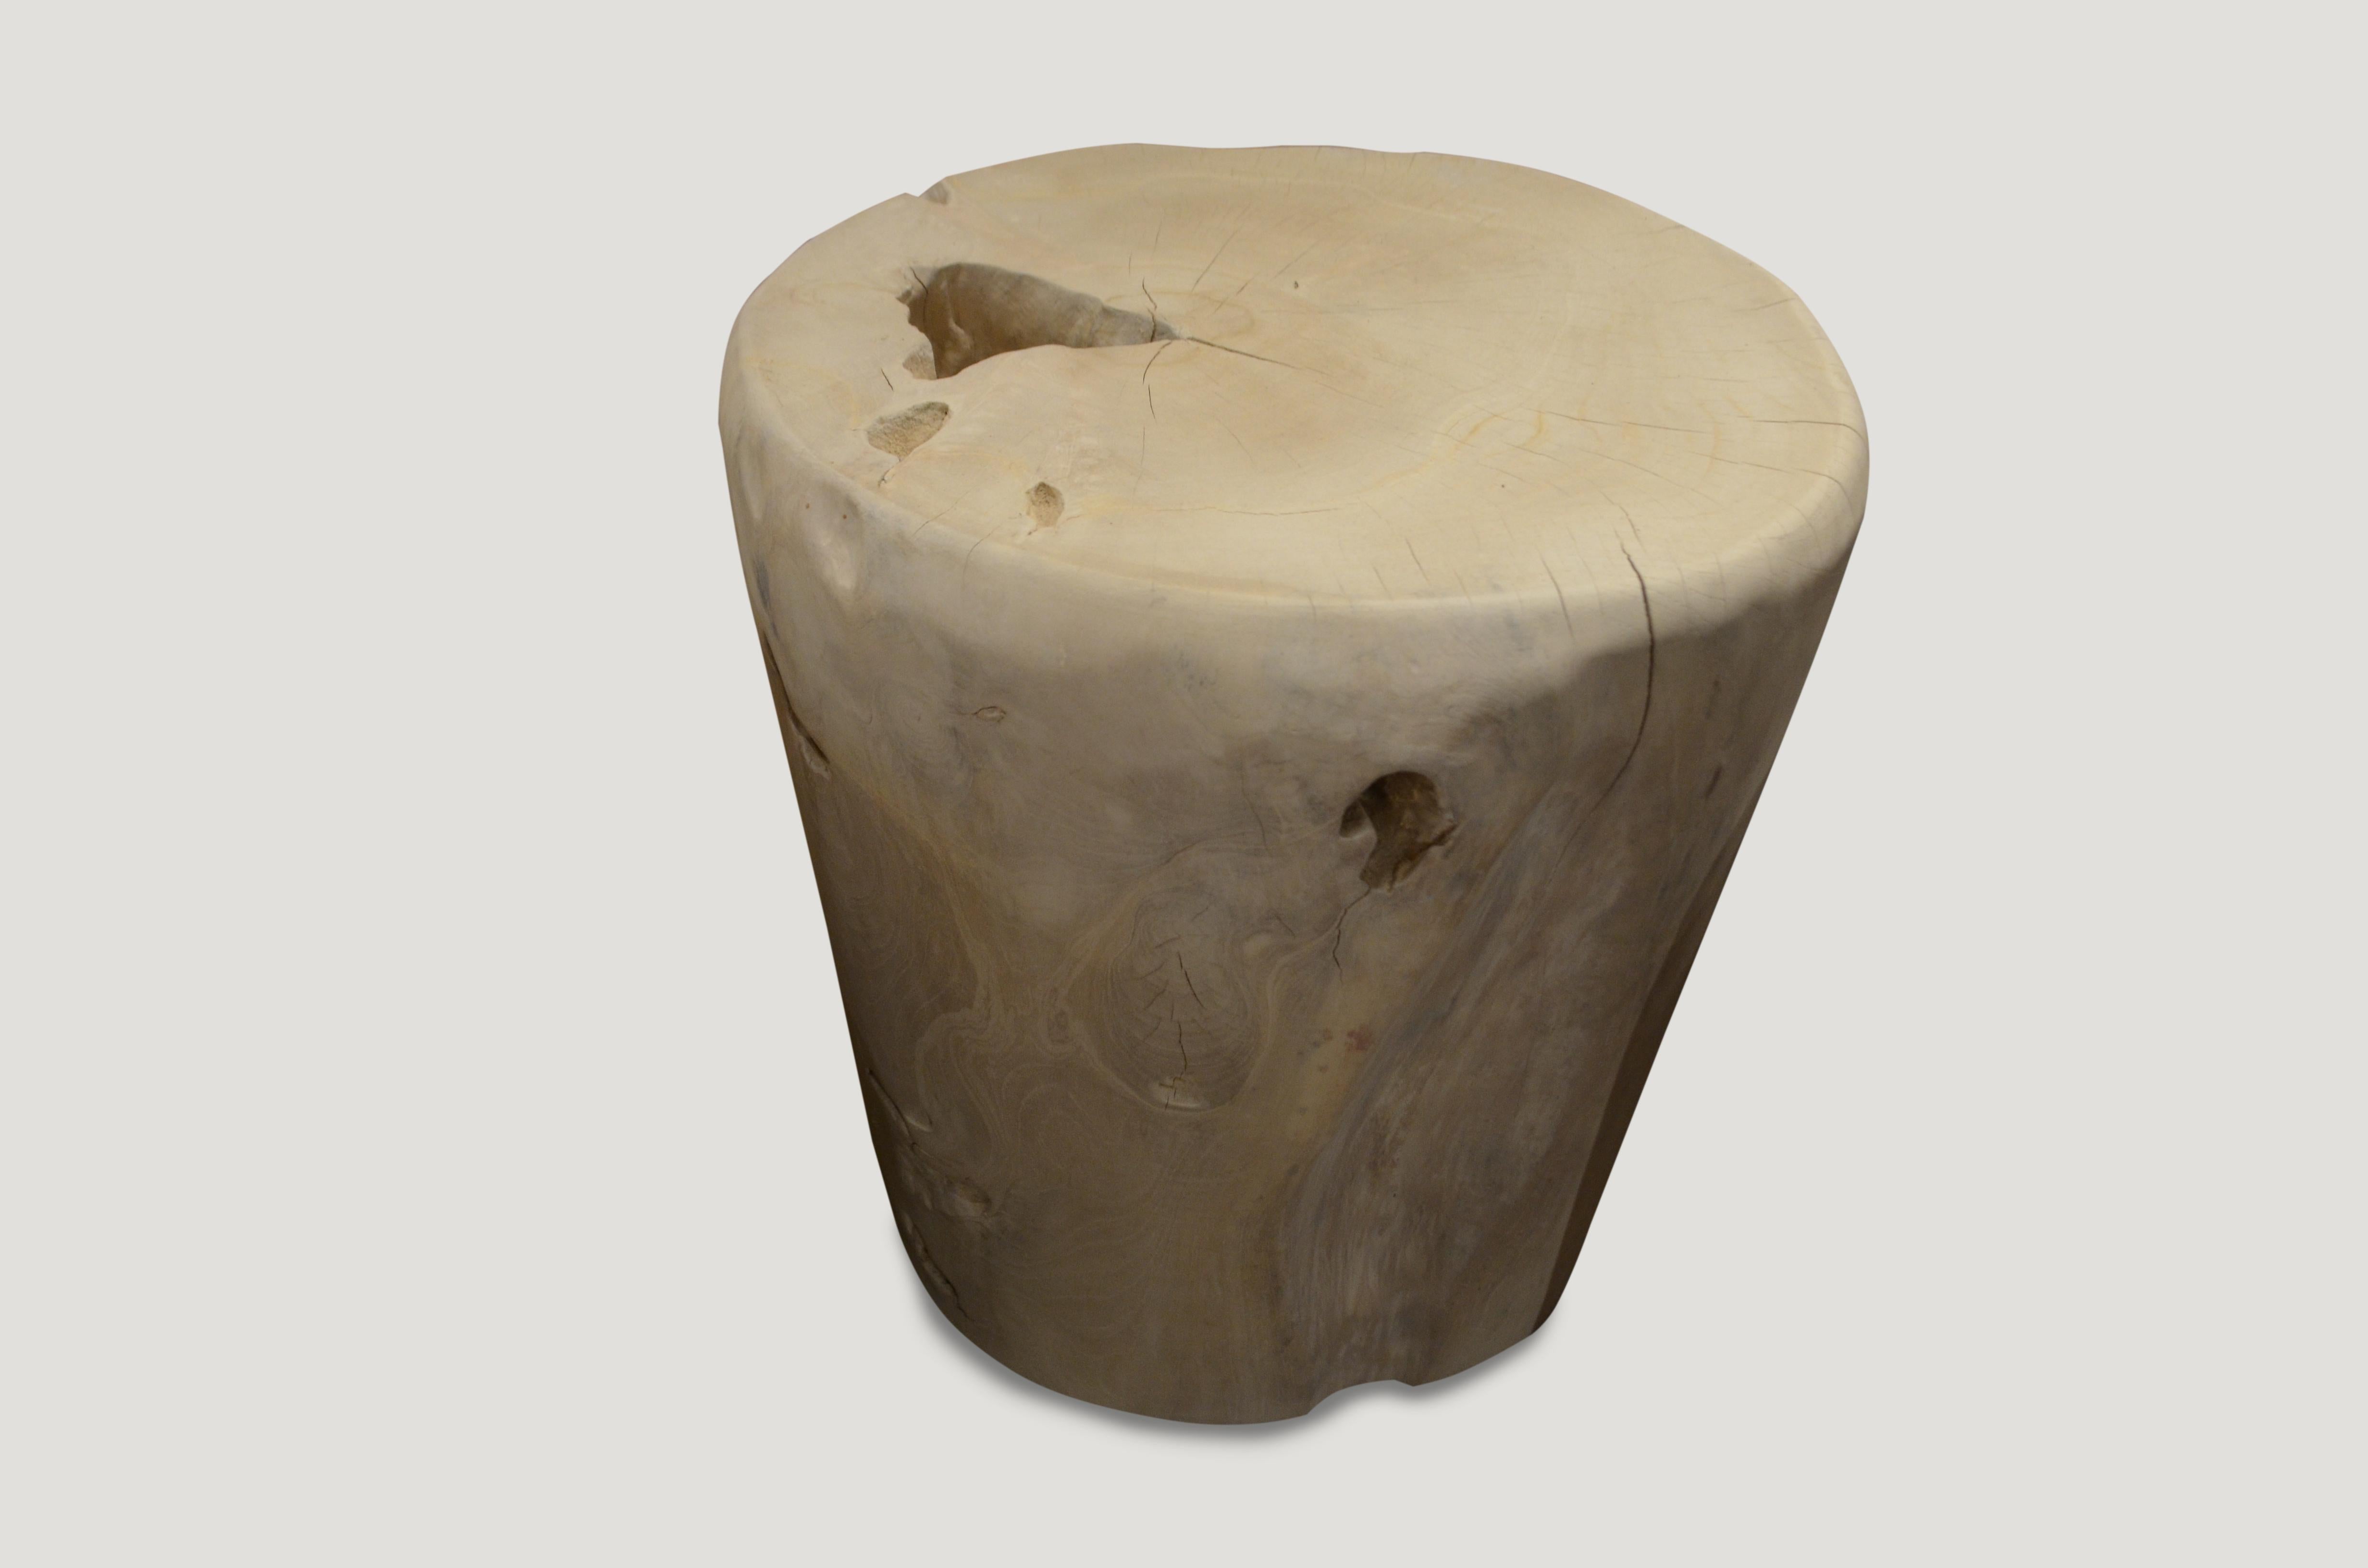 Reclaimed teak which we have hand-carved into drum shaped side tables and then bleached to a bone finish. Pair available. The price reflects one.

The St. Barts collection features an exciting new line of organic white wash and natural weathered